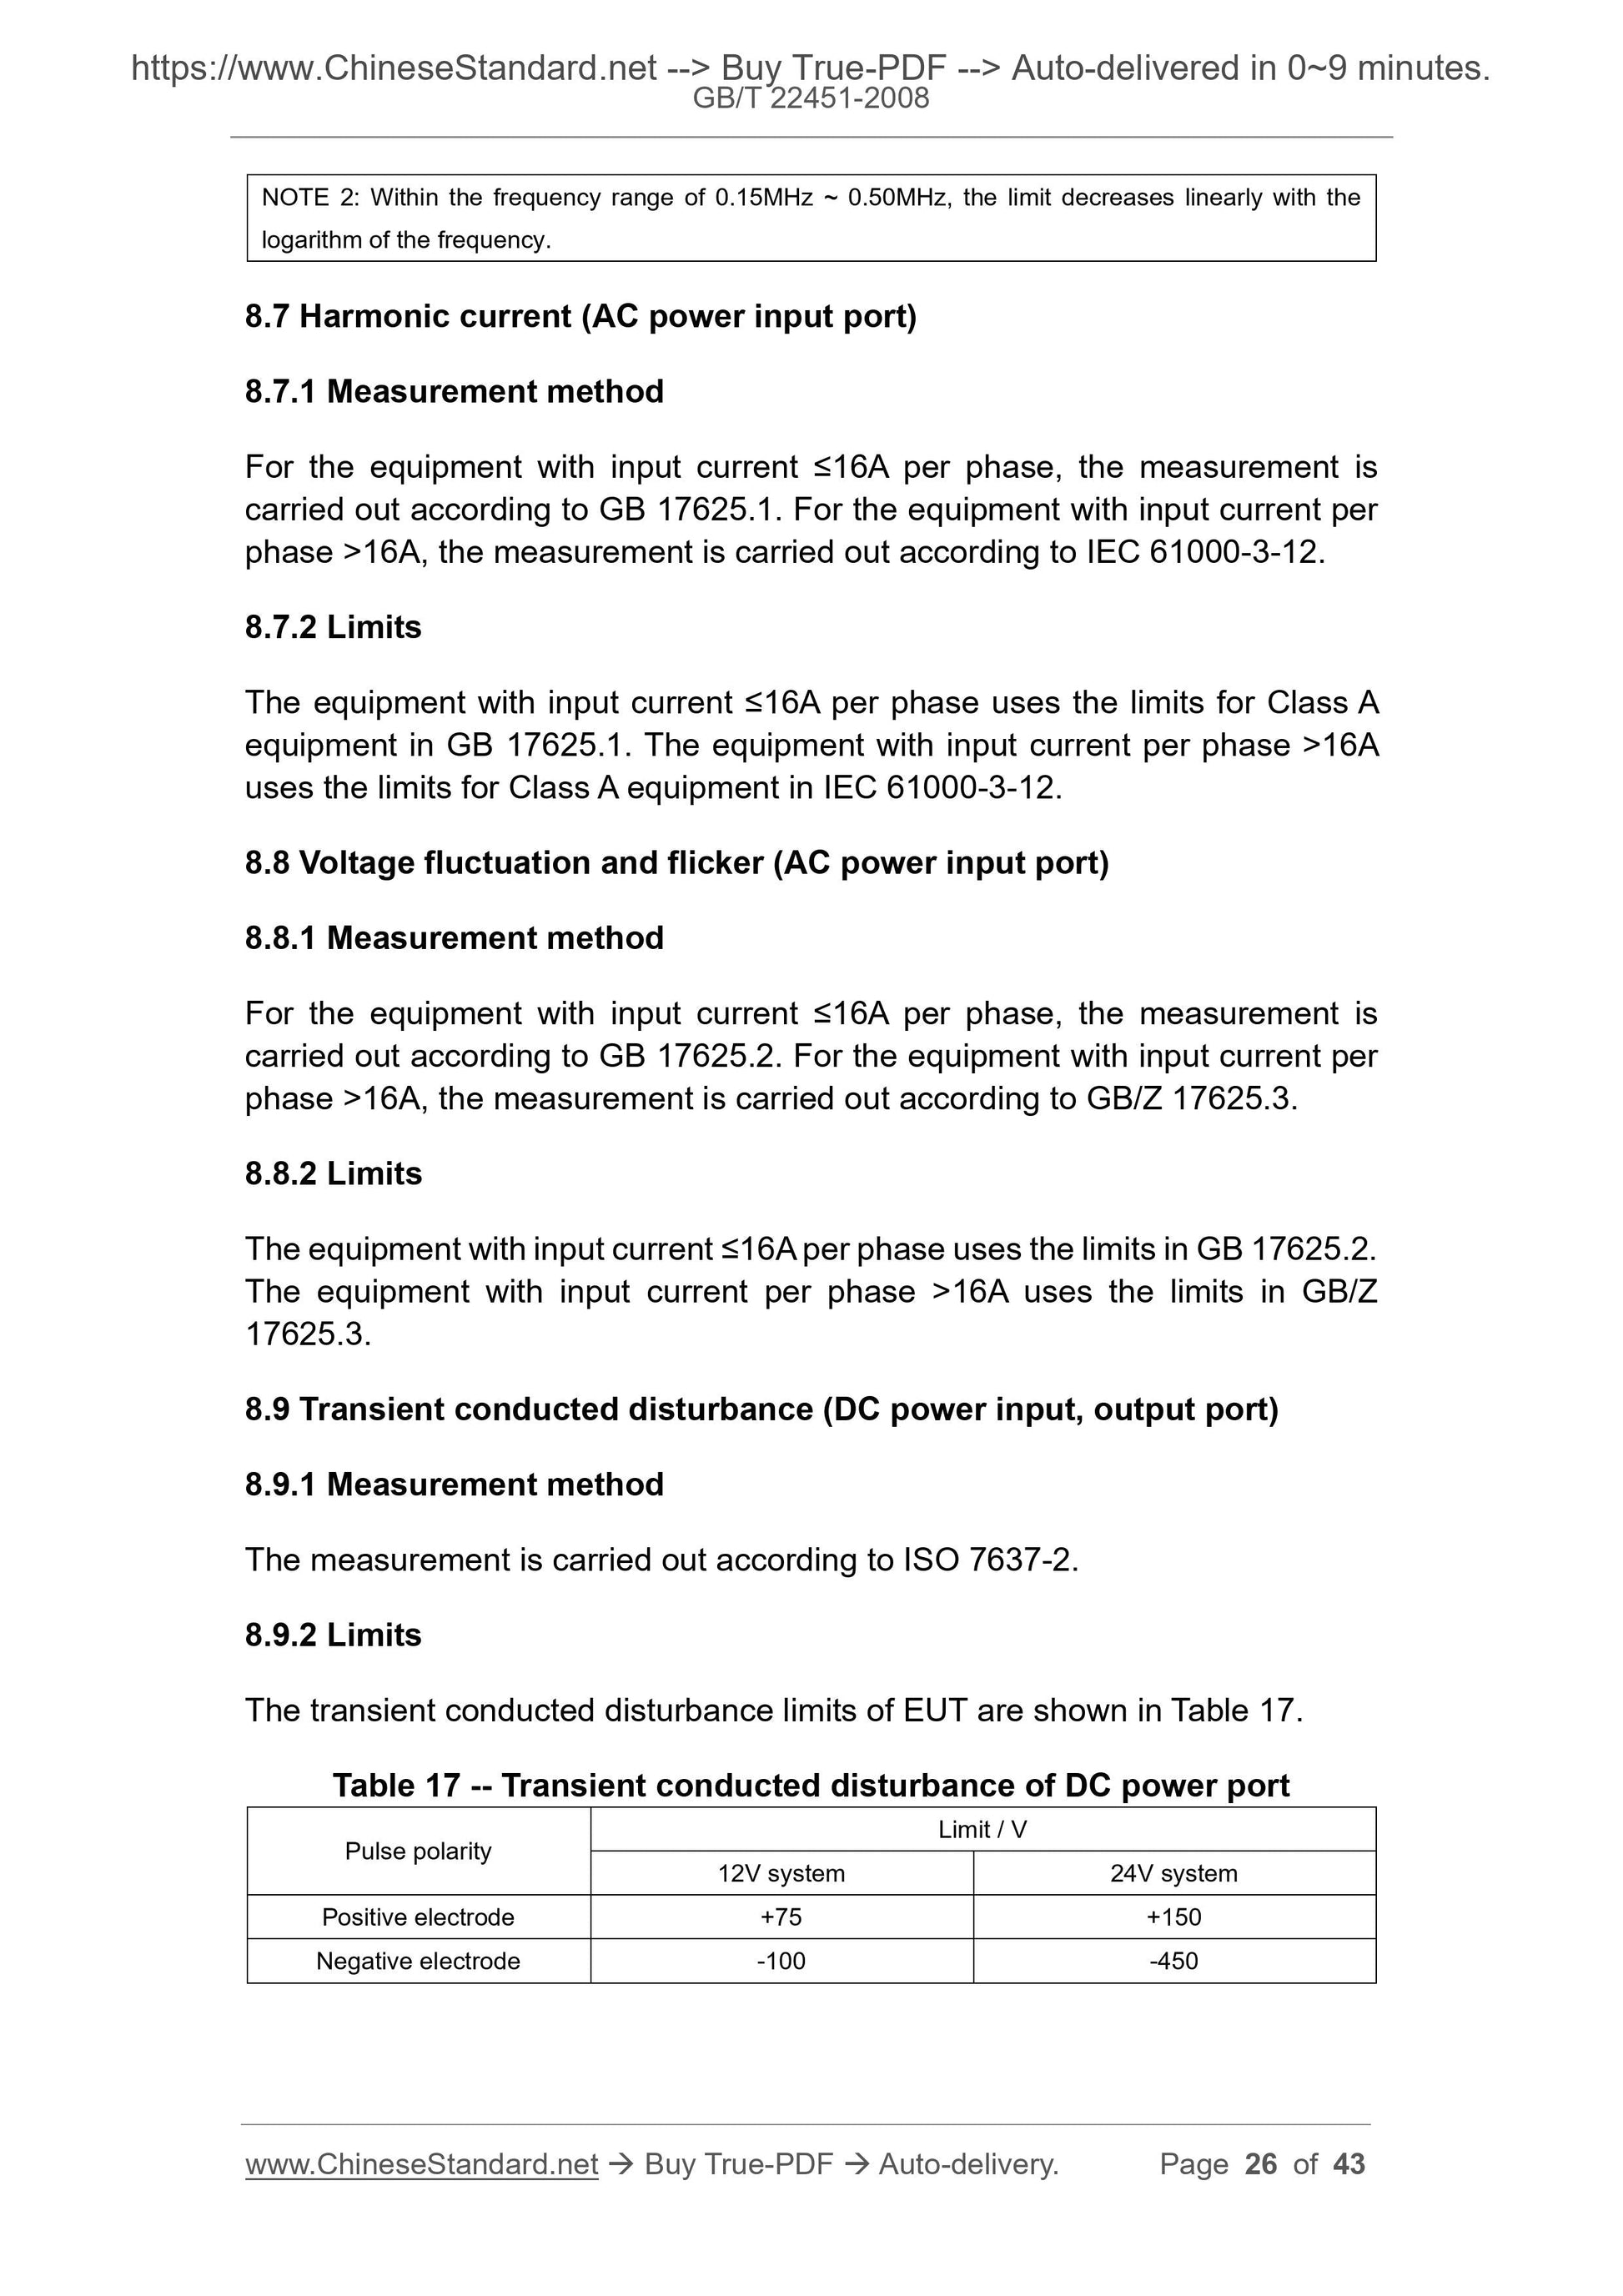 GB/T 22451-2008 Page 11